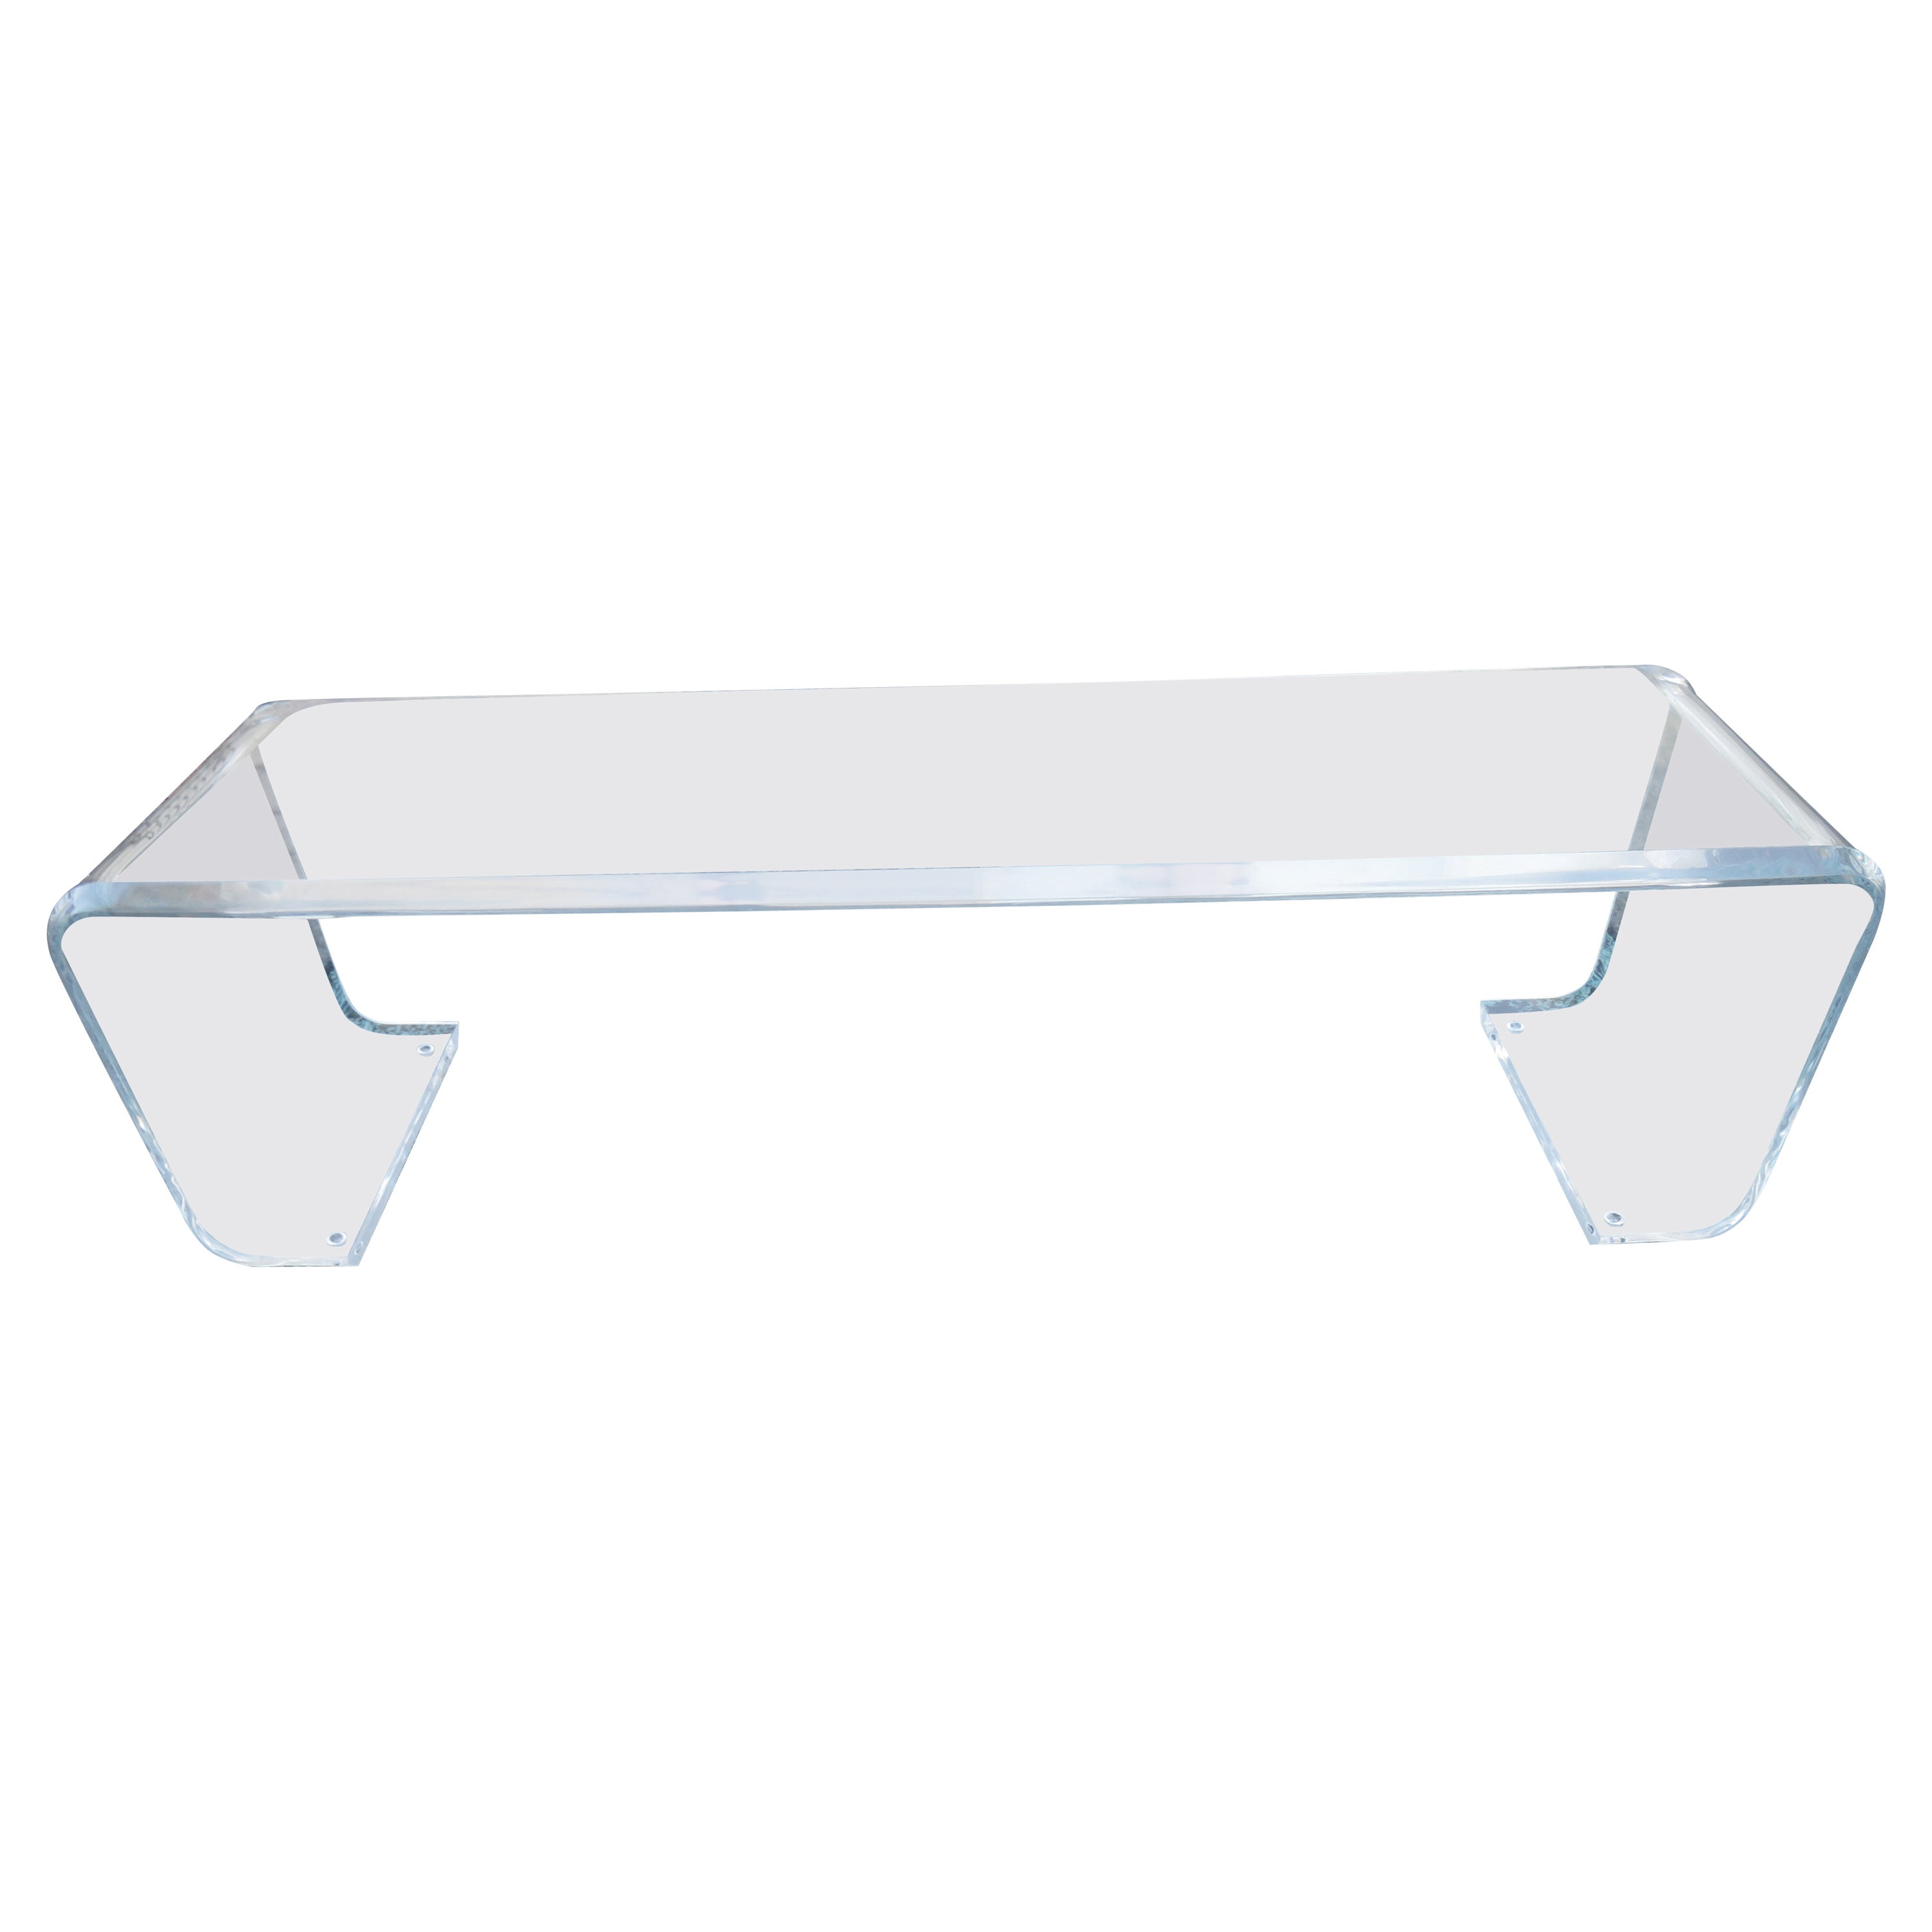 Sparkling Thick Chunky Lucite Scrolled Bench Mid-Century Modern